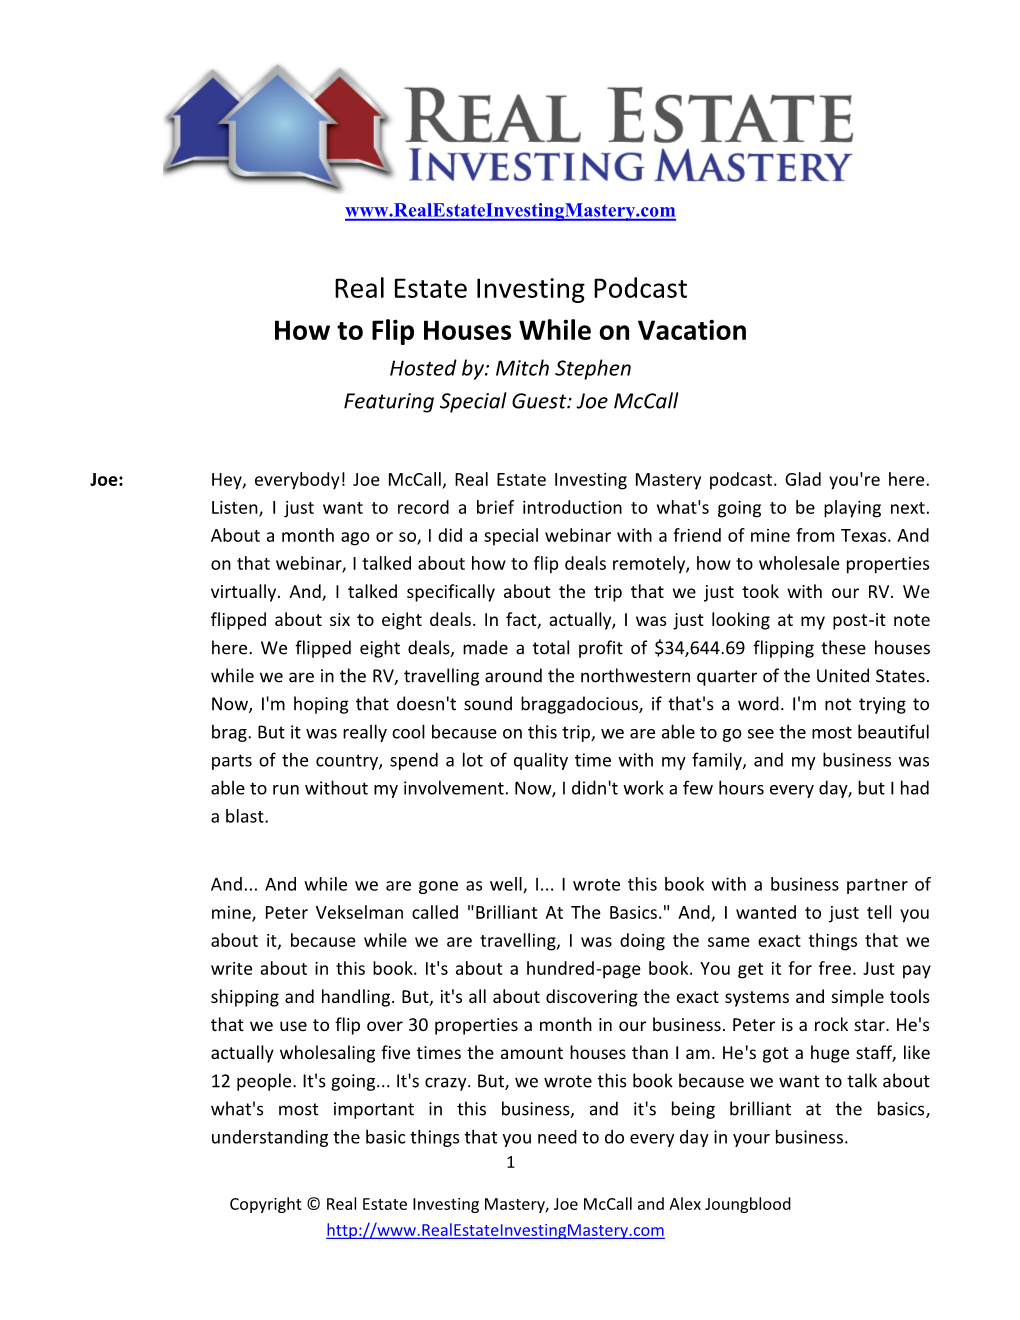 Real Estate Investing Podcast How to Flip Houses While on Vacation Hosted By: Mitch Stephen Featuring Special Guest: Joe Mccall